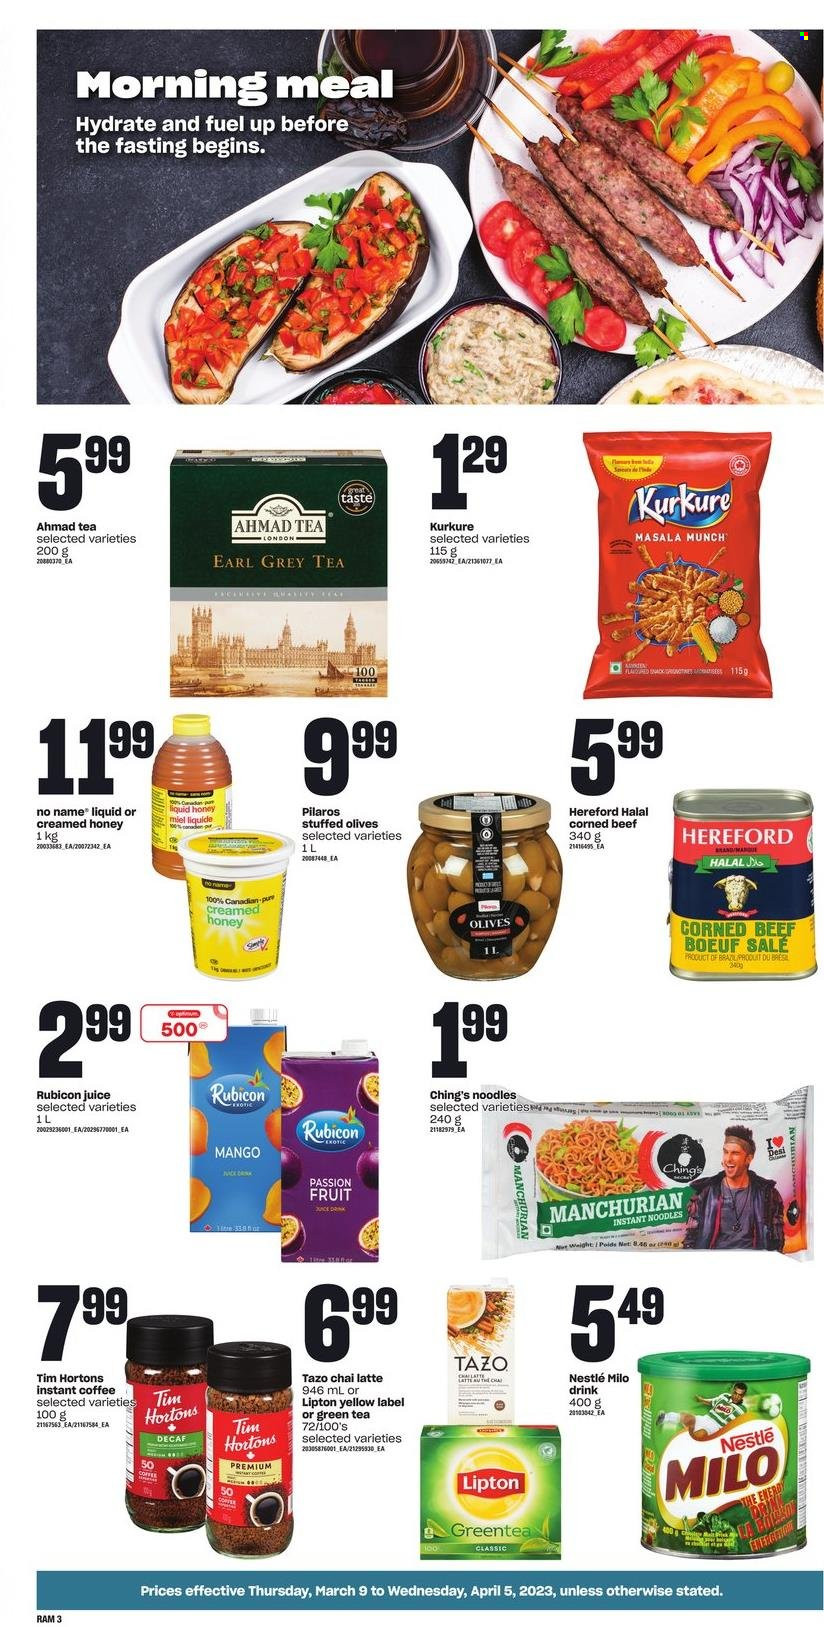 thumbnail - Zehrs Flyer - March 09, 2023 - April 05, 2023 - Sales products - No Name, instant noodles, noodles, corned beef, Milo, snack, honey, juice, green tea, coffee, instant coffee, beef meat, Nestlé, olives, Lipton. Page 3.